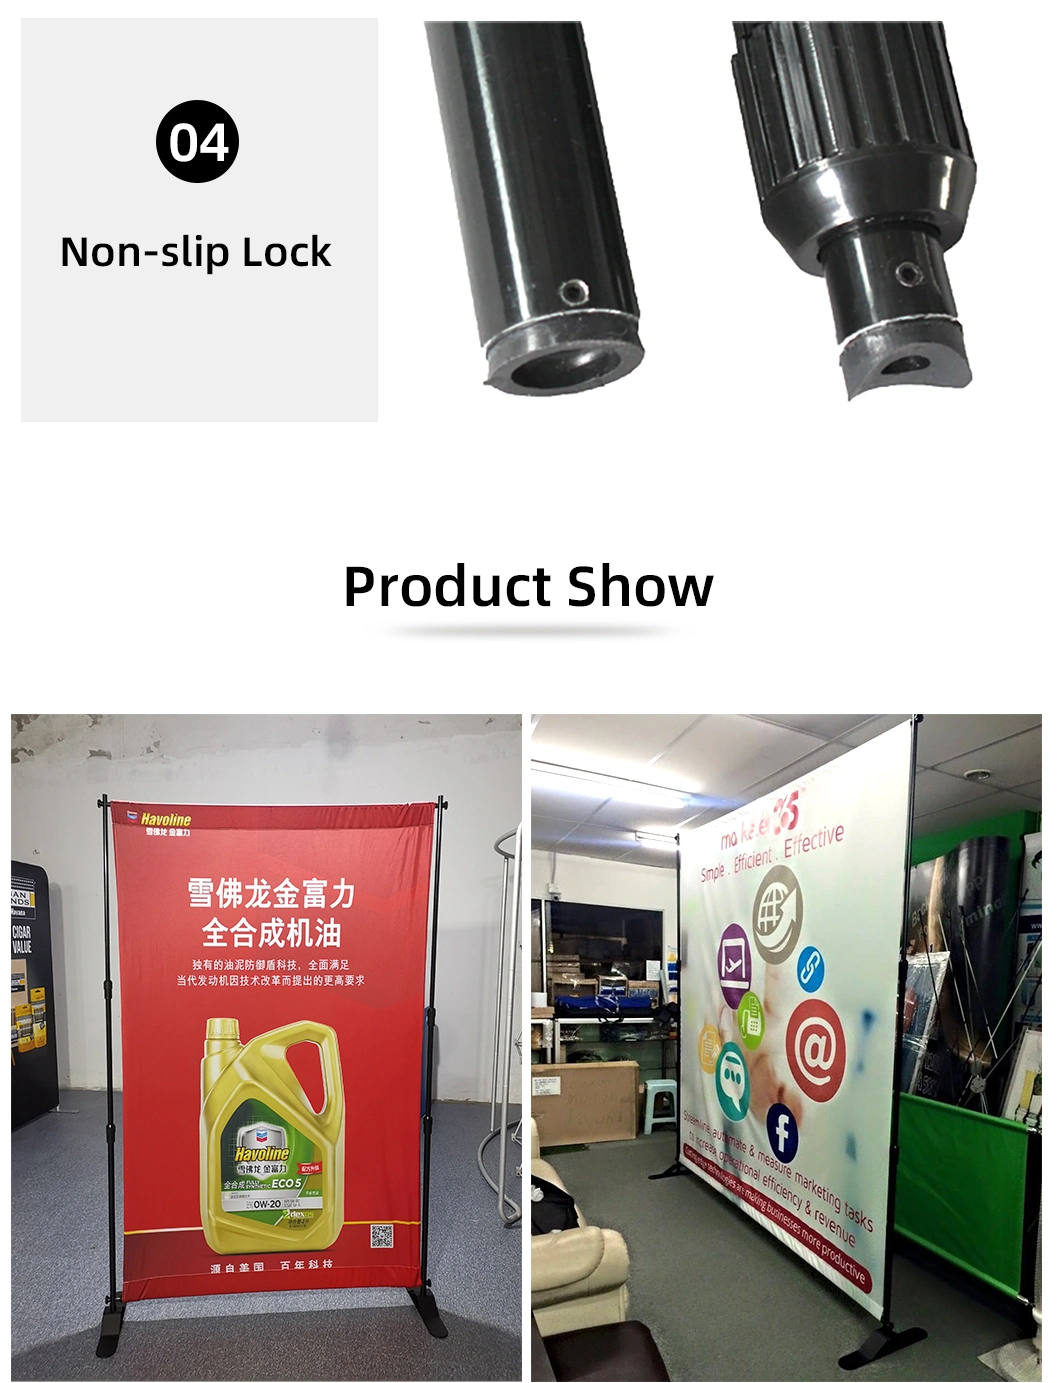 8' X 8' Adjustable Telescopic Display Backdrop Stand Step and Repeat for Trade Show, Photo Booth, Wall Exhibitor Background with Carrying Bag